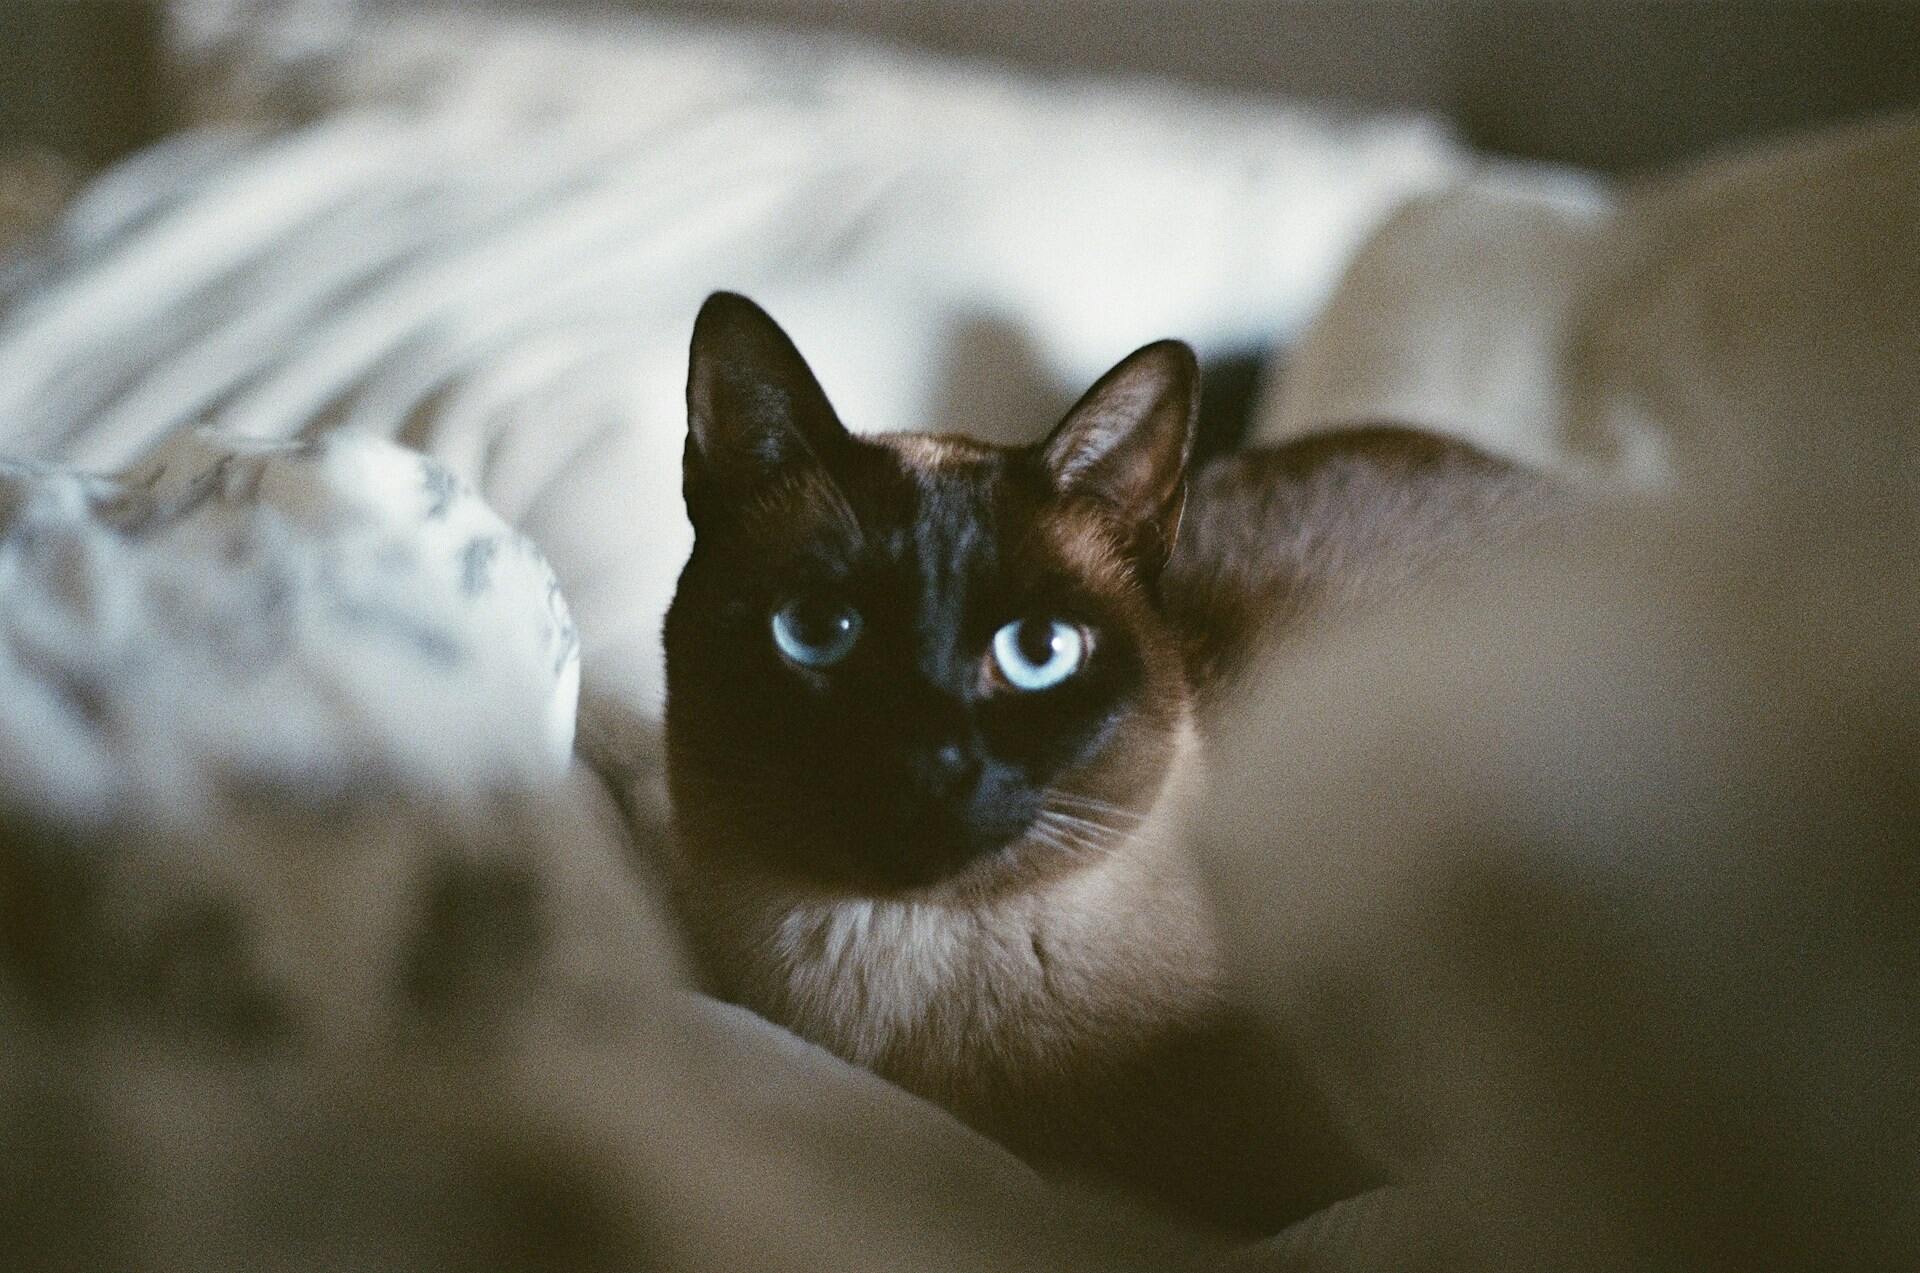 A Tonkinese cat sitting on a bed